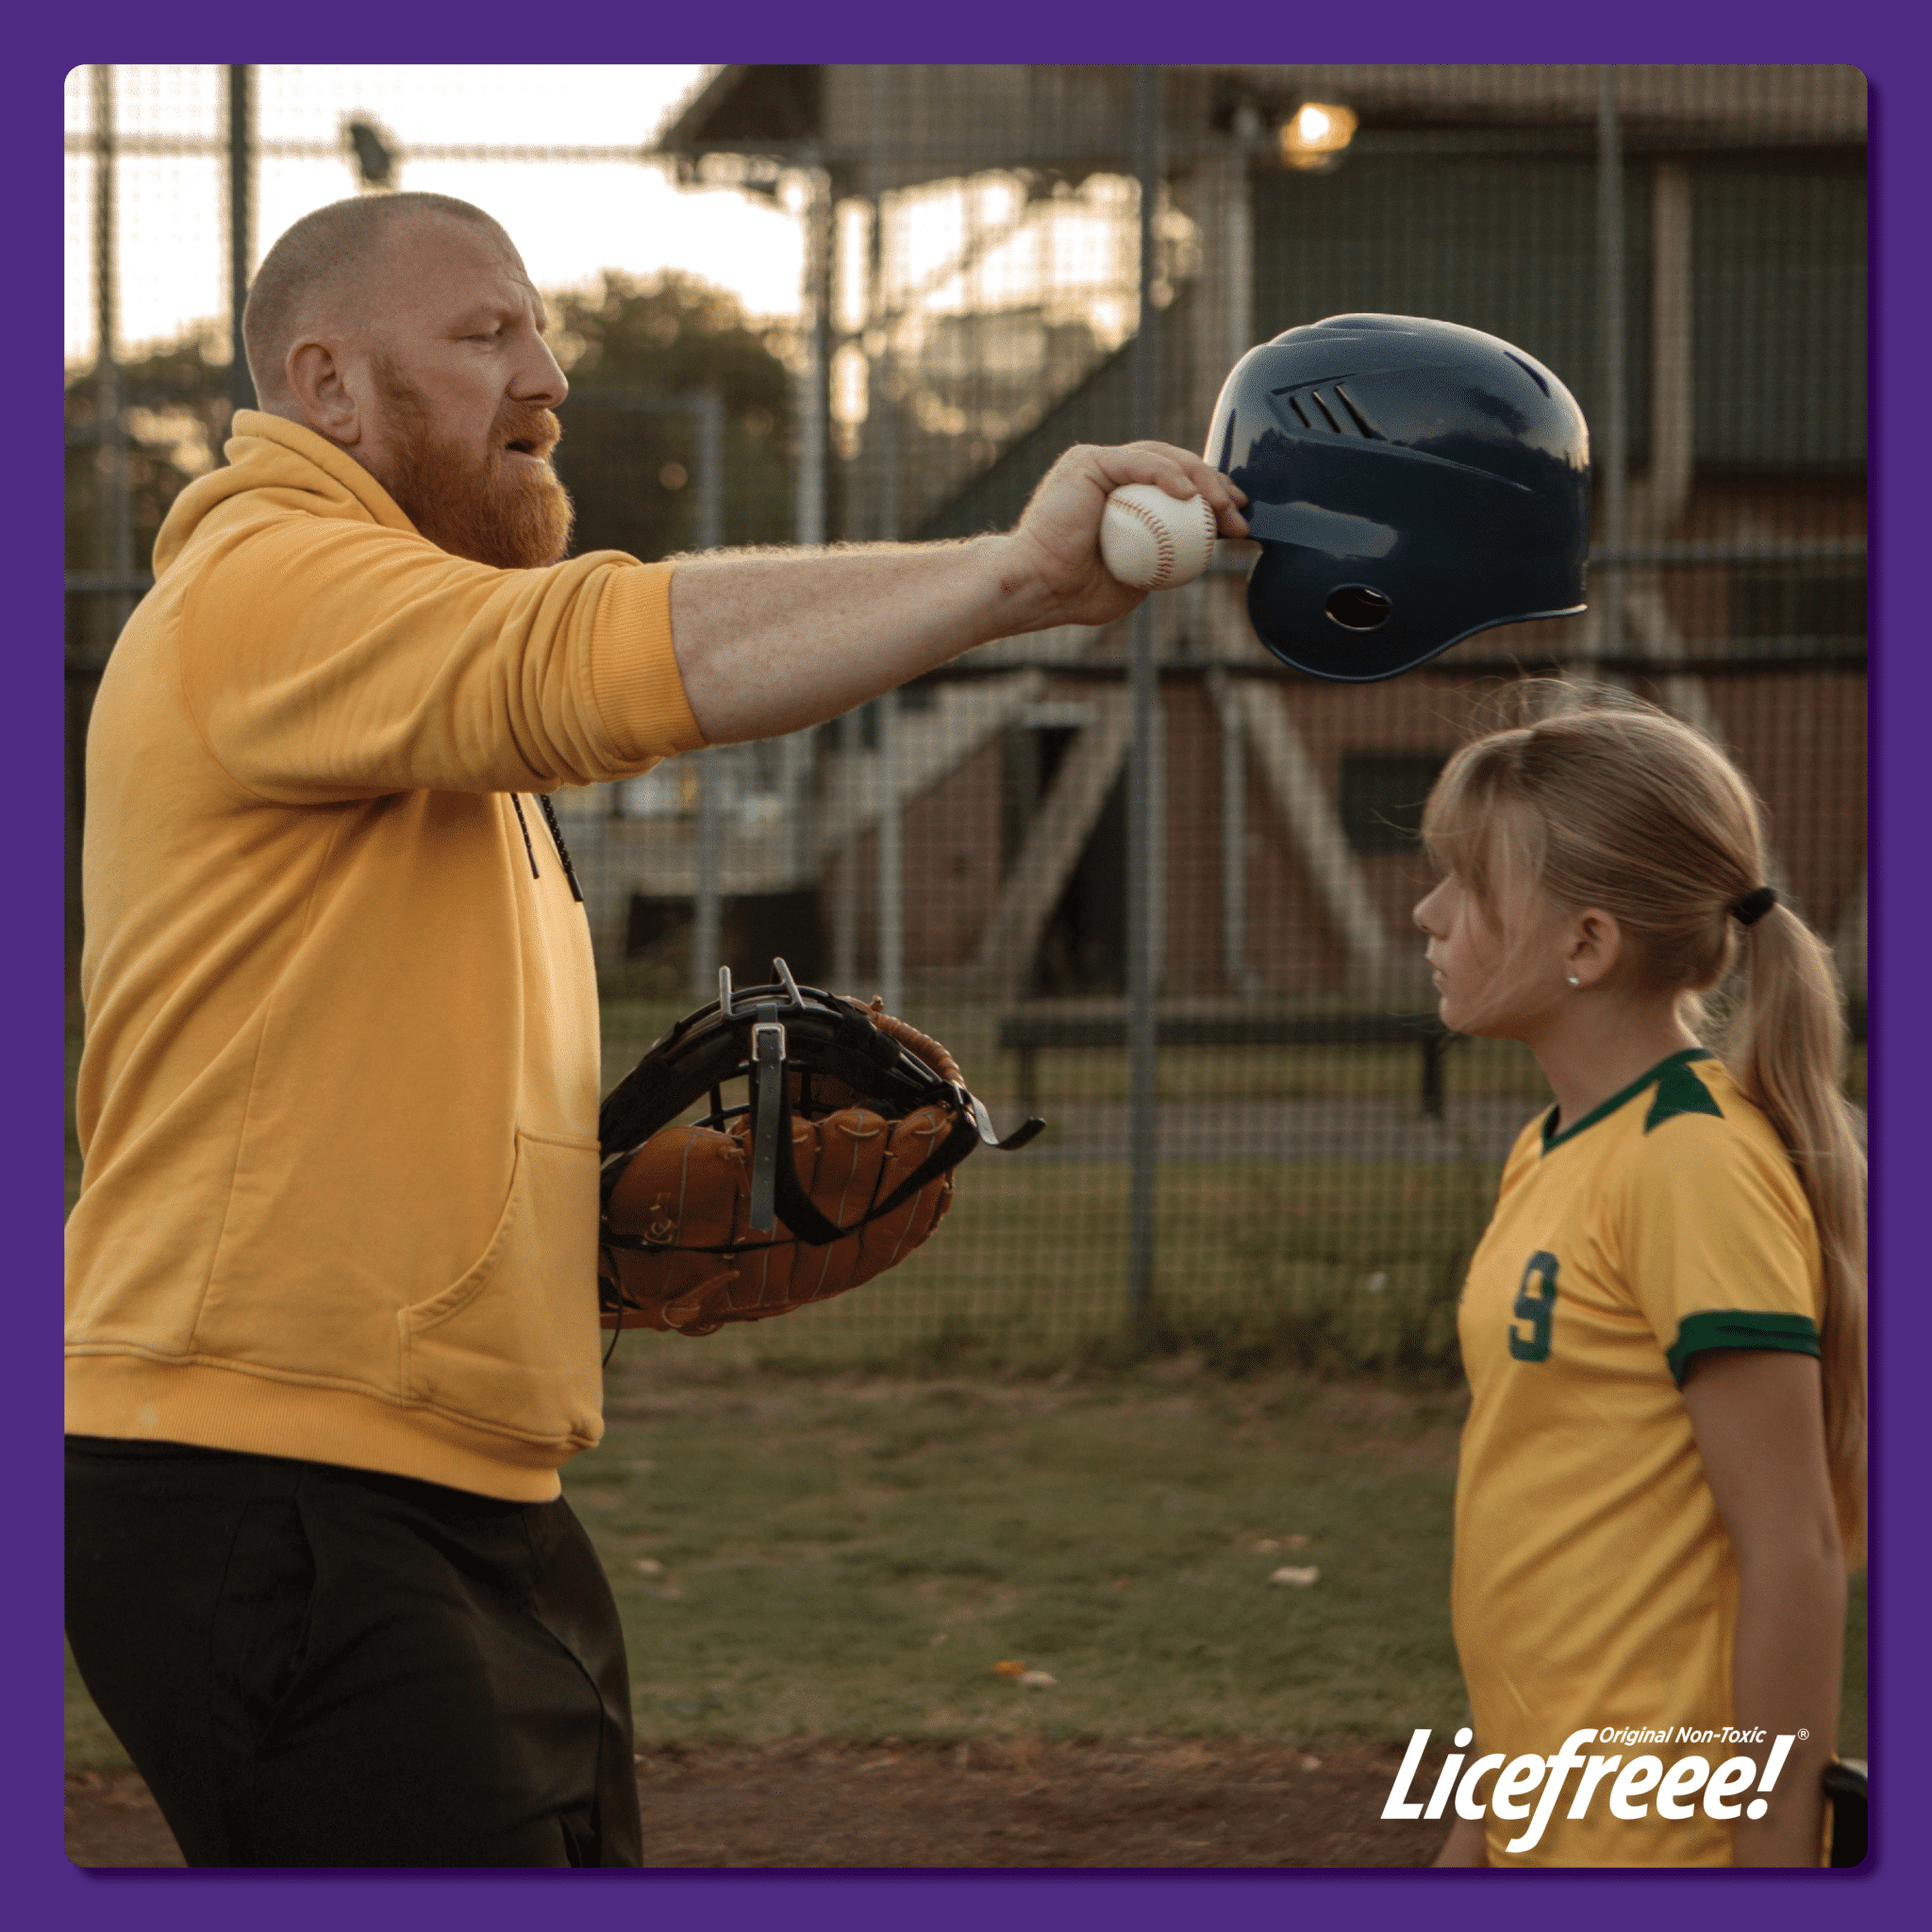 A baseball coach is about to put on a batting helmet on a young girl's head.